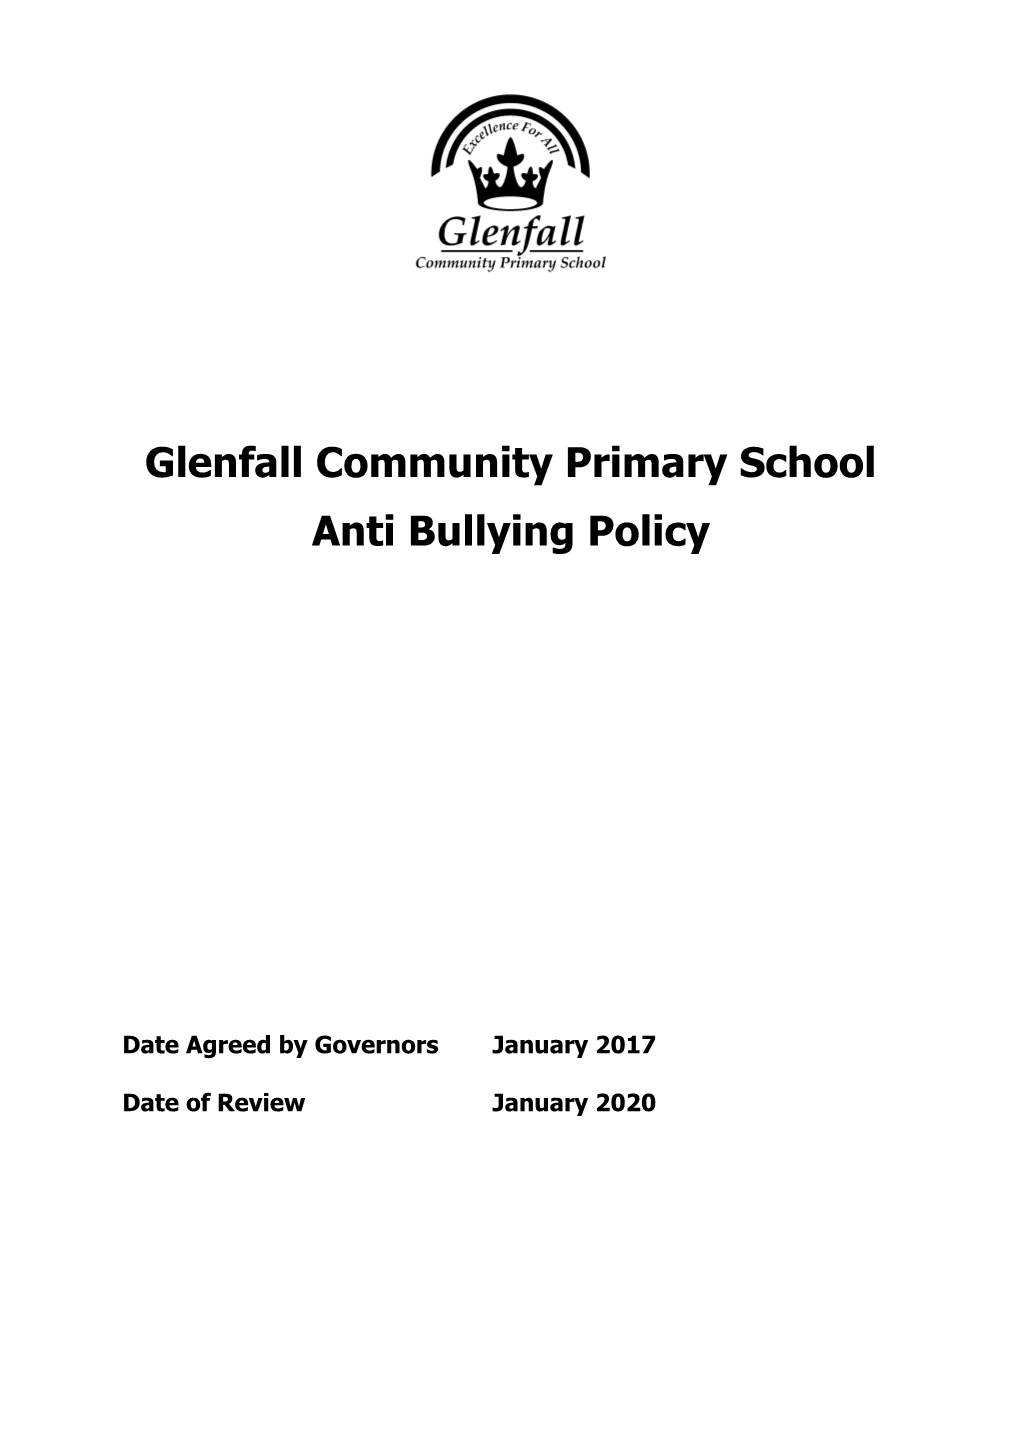 Our Bullying Policy